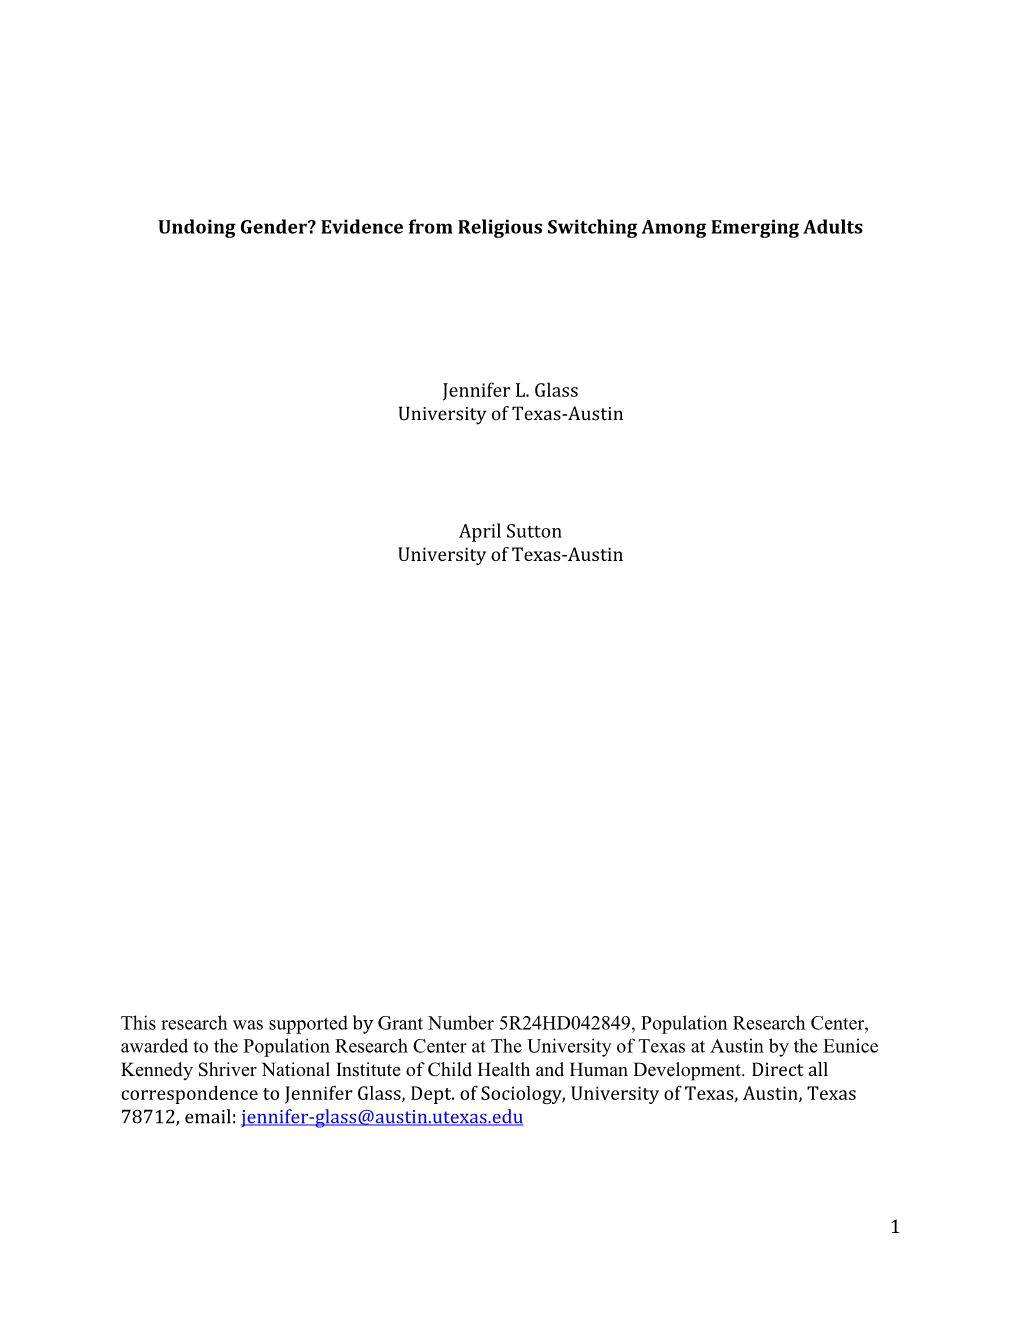 Evidence from Religious Switching Among Emerging Adults